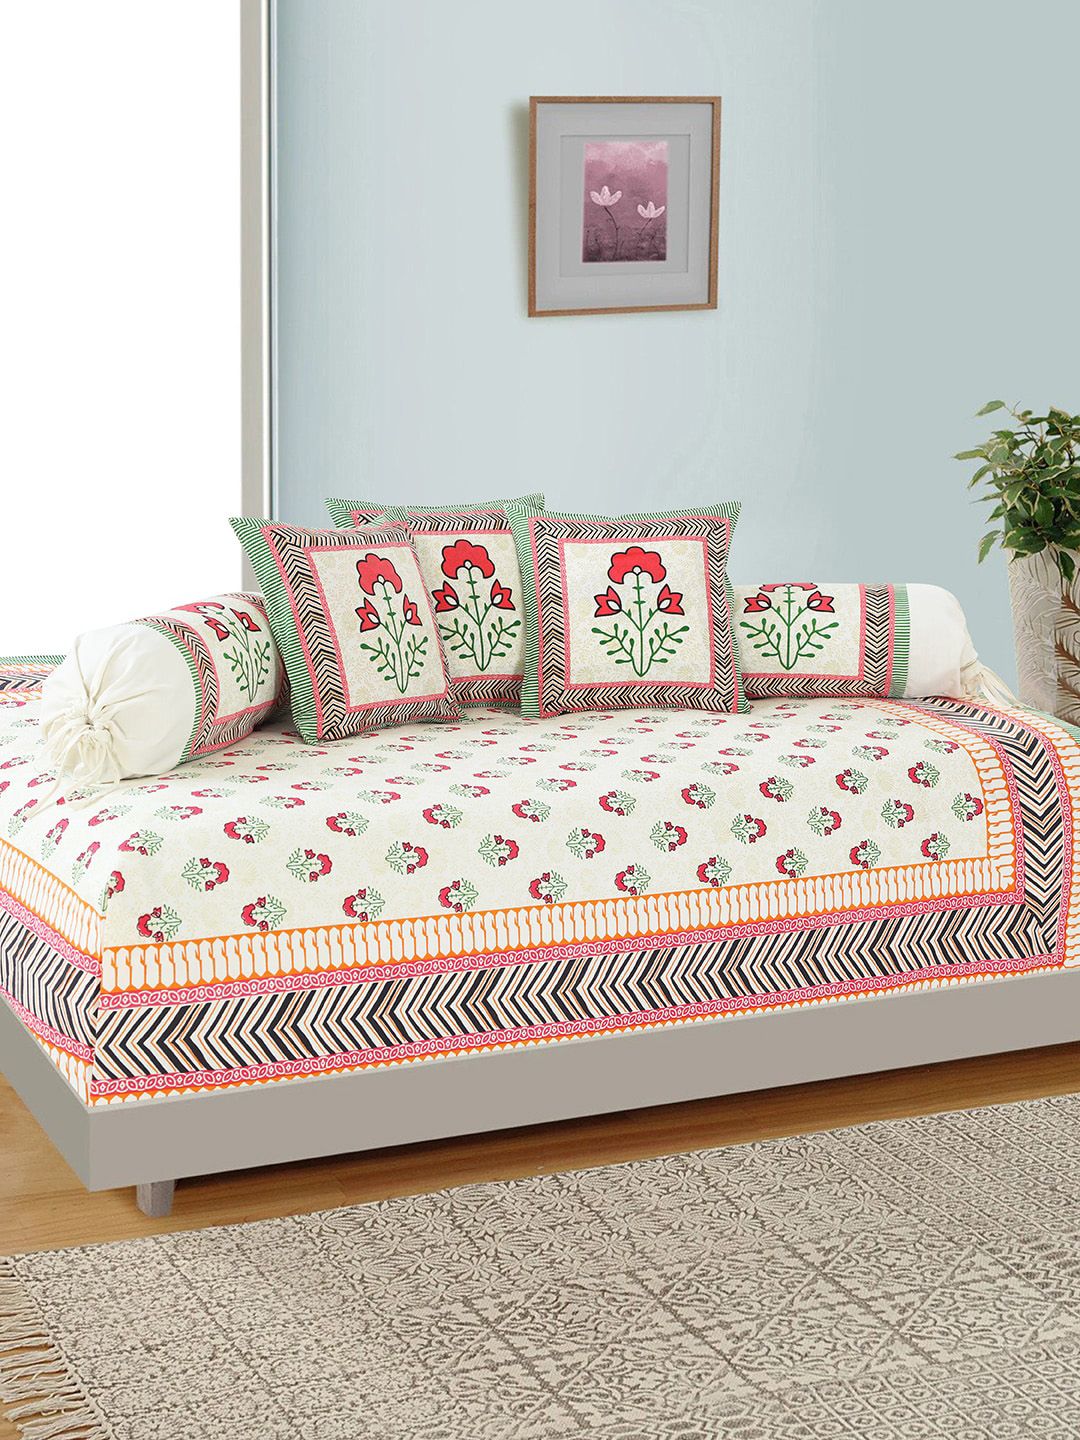 Salona Bichona Set Of 6 Off-White & Coral-Coloured Floral Printed 120 TC Cotton Bedsheet With Bolster & Cushion Covers Price in India